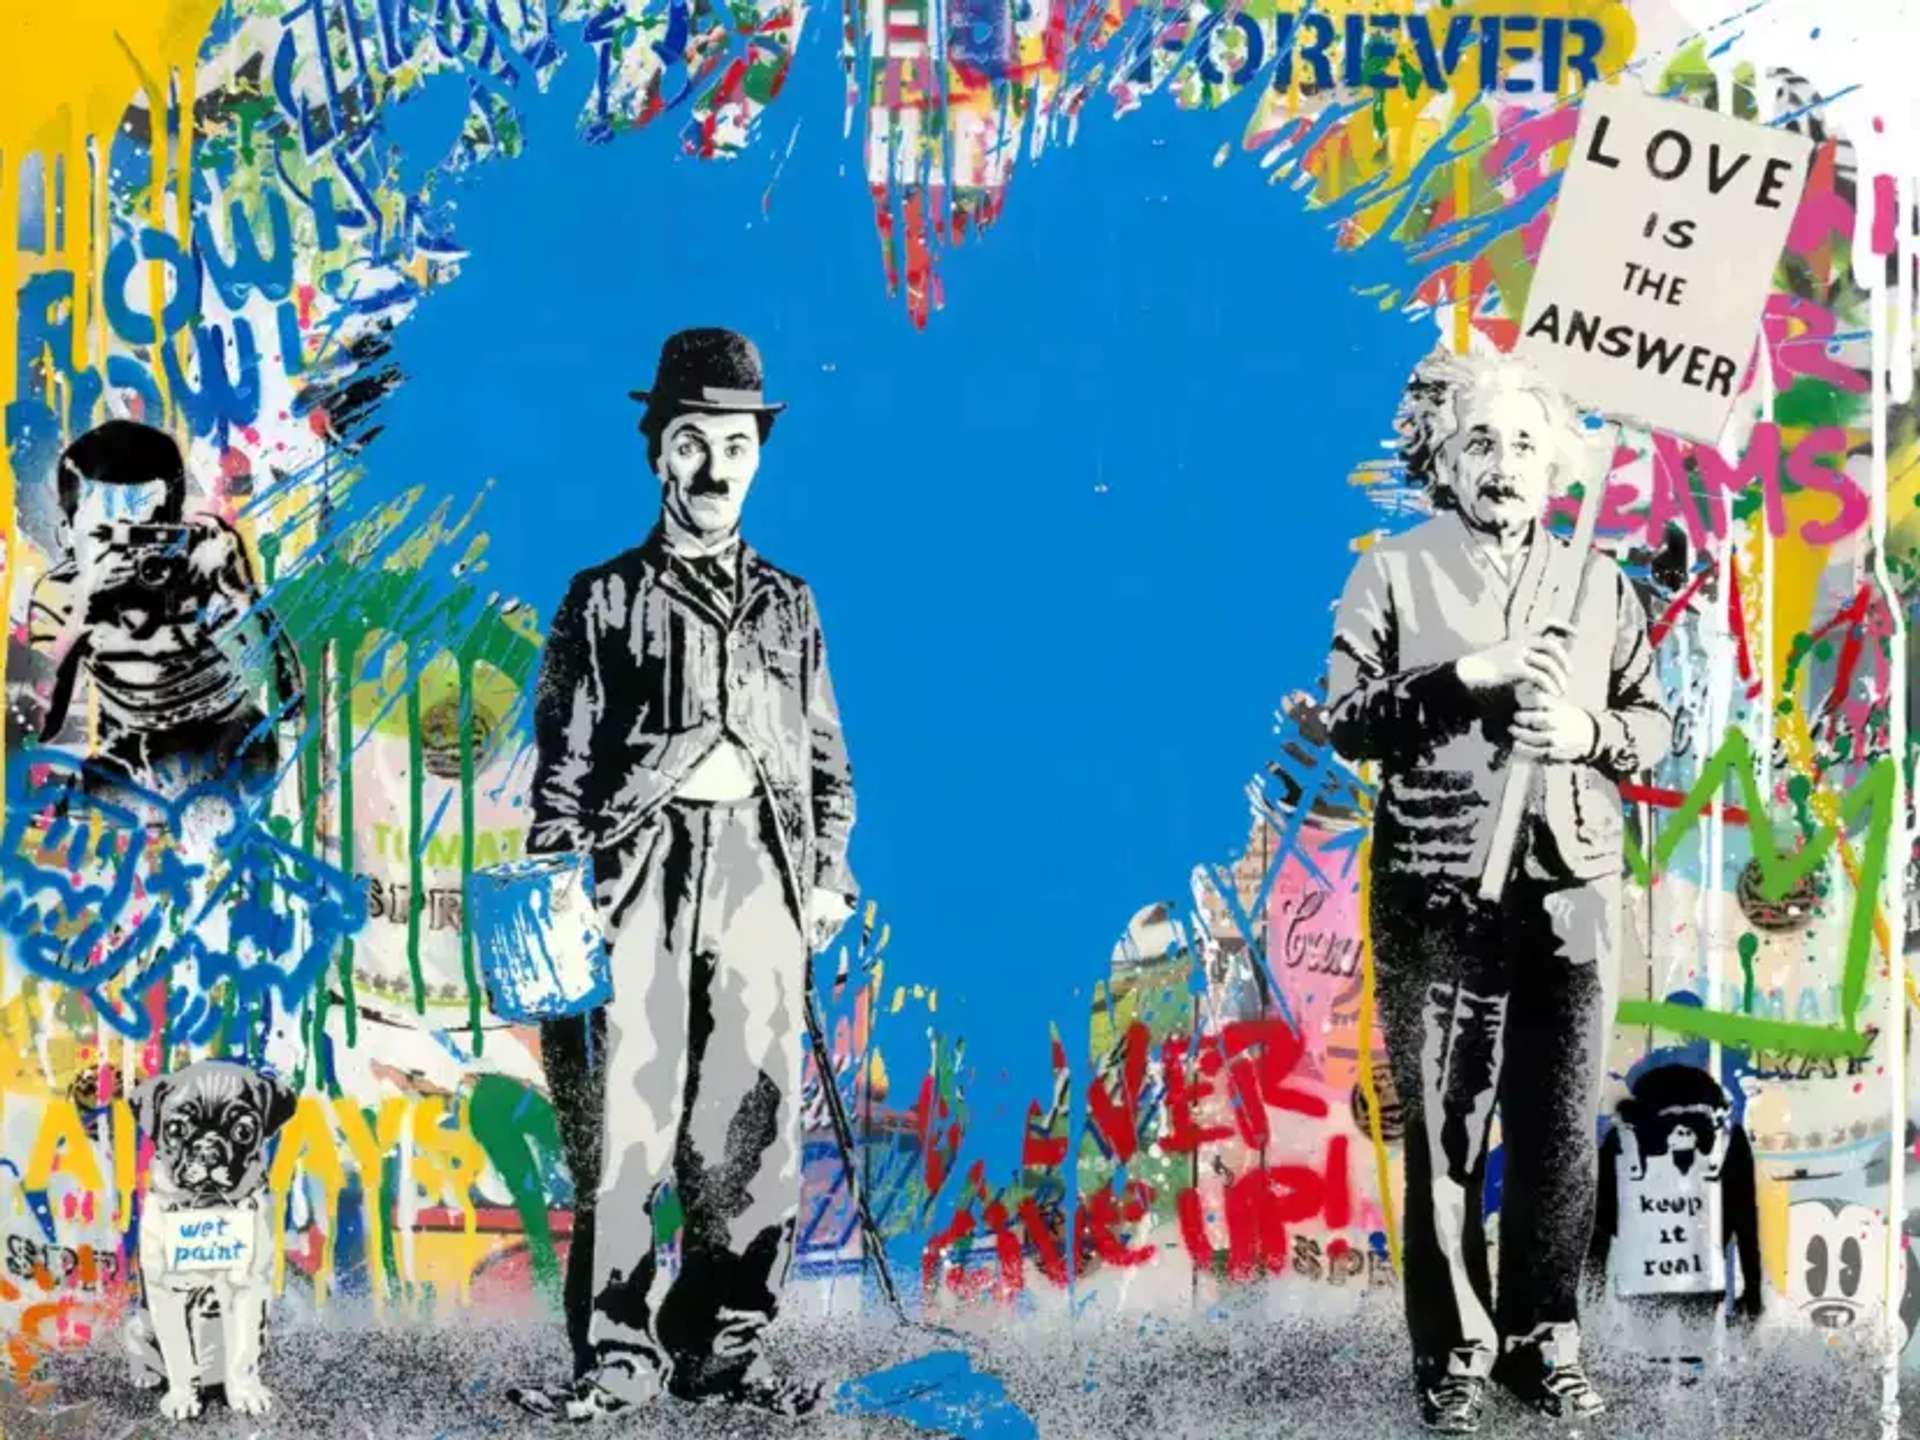 A graffiti-inspired artwork showcasing stencils of Charlie Chaplin and Albert Einstein side by side. Charlie Chaplin holds an open bucket of blue paint while Albert Einstein holds a picketed sign that reads 'LOVE IS THE ANSWER'. They both stand against a graffiti-covered wall adorned with collaged stencils and a prominently filled-in blue heart.